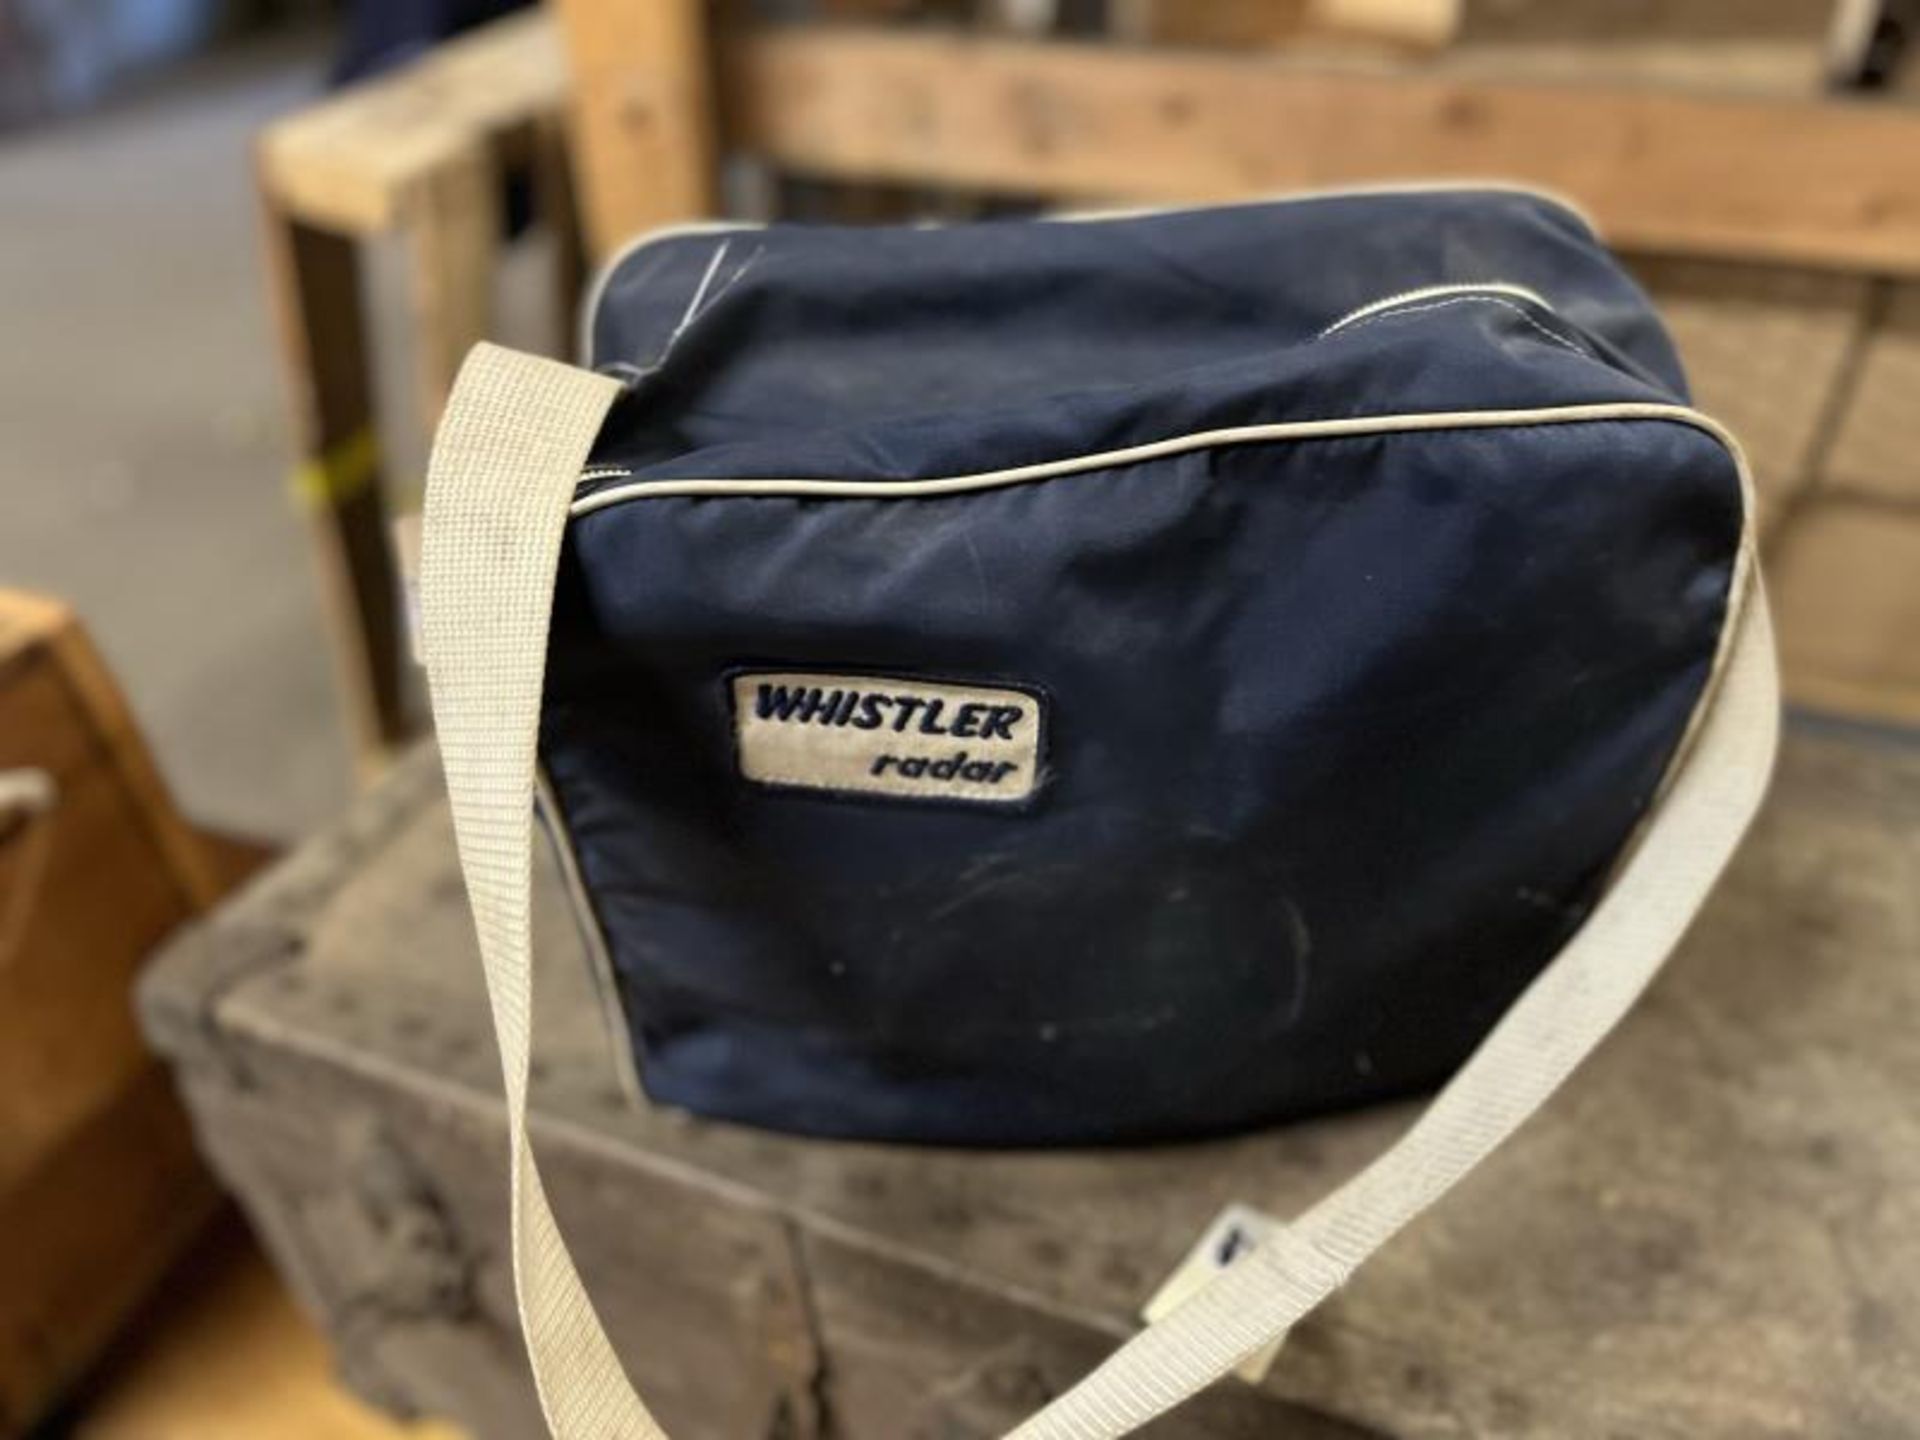 Whistler Radar in Original Bag, Unknown Condition in Mill Building - Image 2 of 6